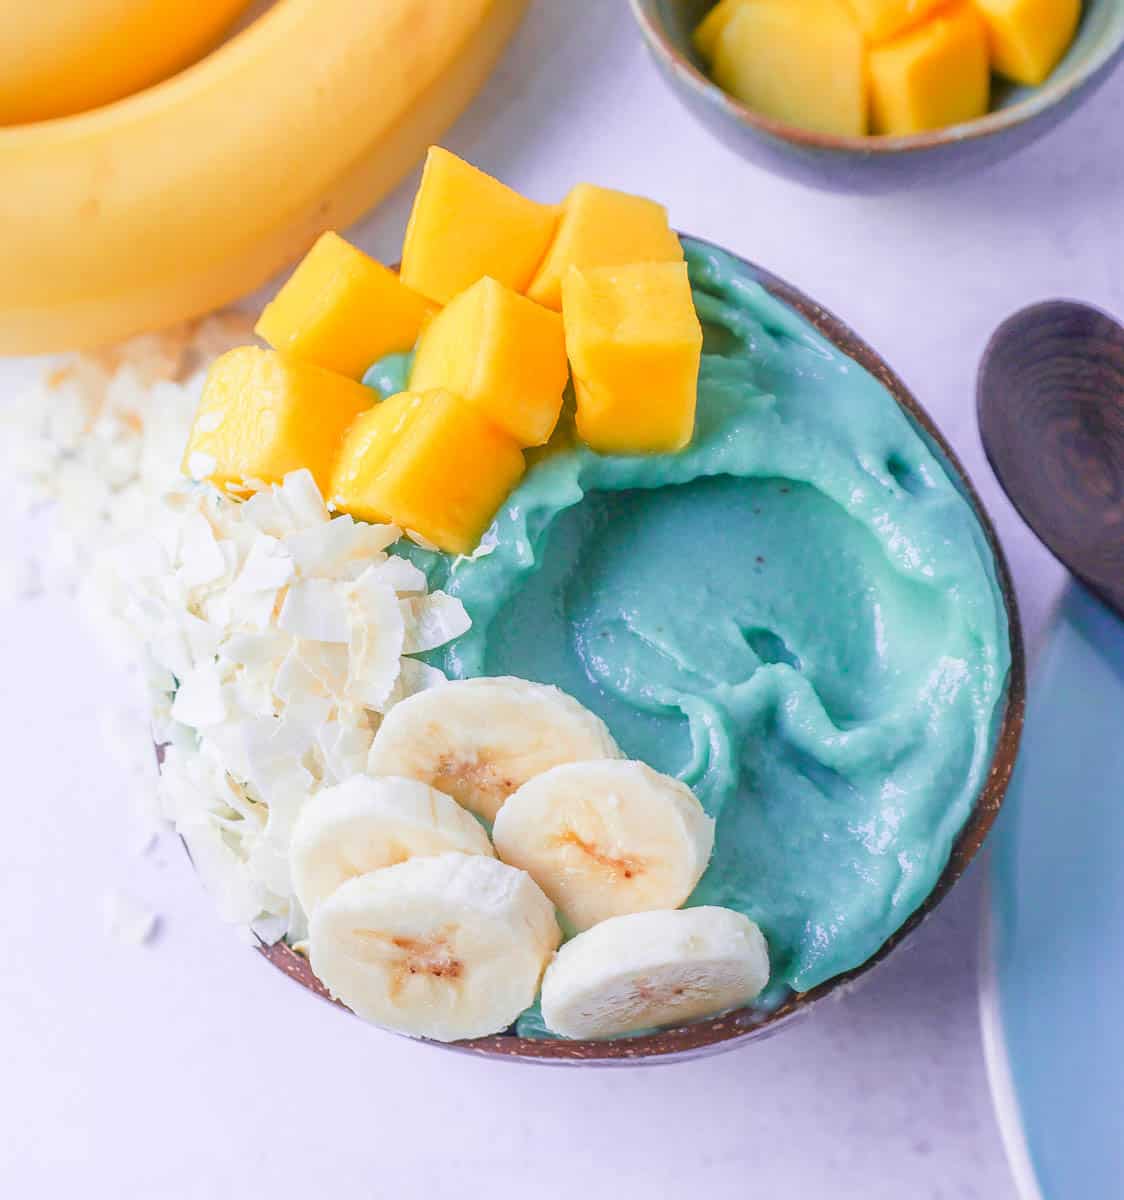 Blue Tropical Pineapple Coconut Smoothie Bowl:

This tropical smoothie bowl is absolutely beautiful and delicious with the addition of the blue spirulina powder which makes it a ocean blue color. Coconut Pineapple Smoothie Bowl Recipe.